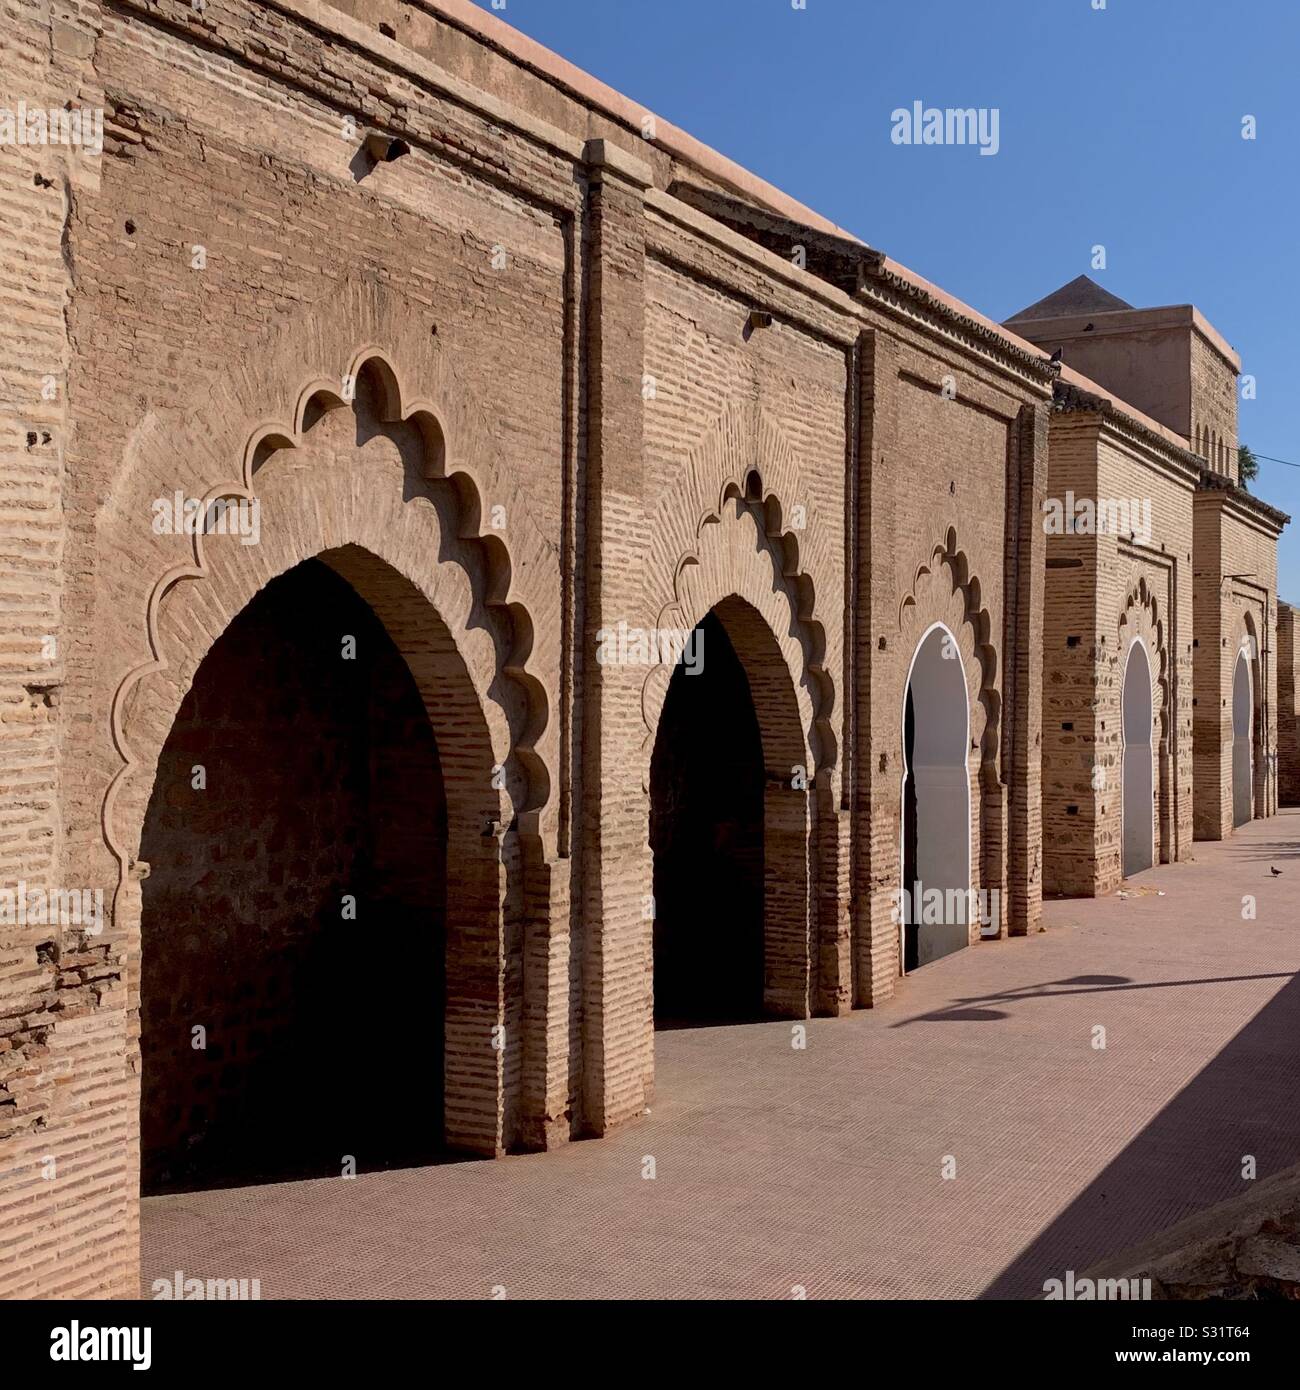 Decorative archways at mosque Stock Photo